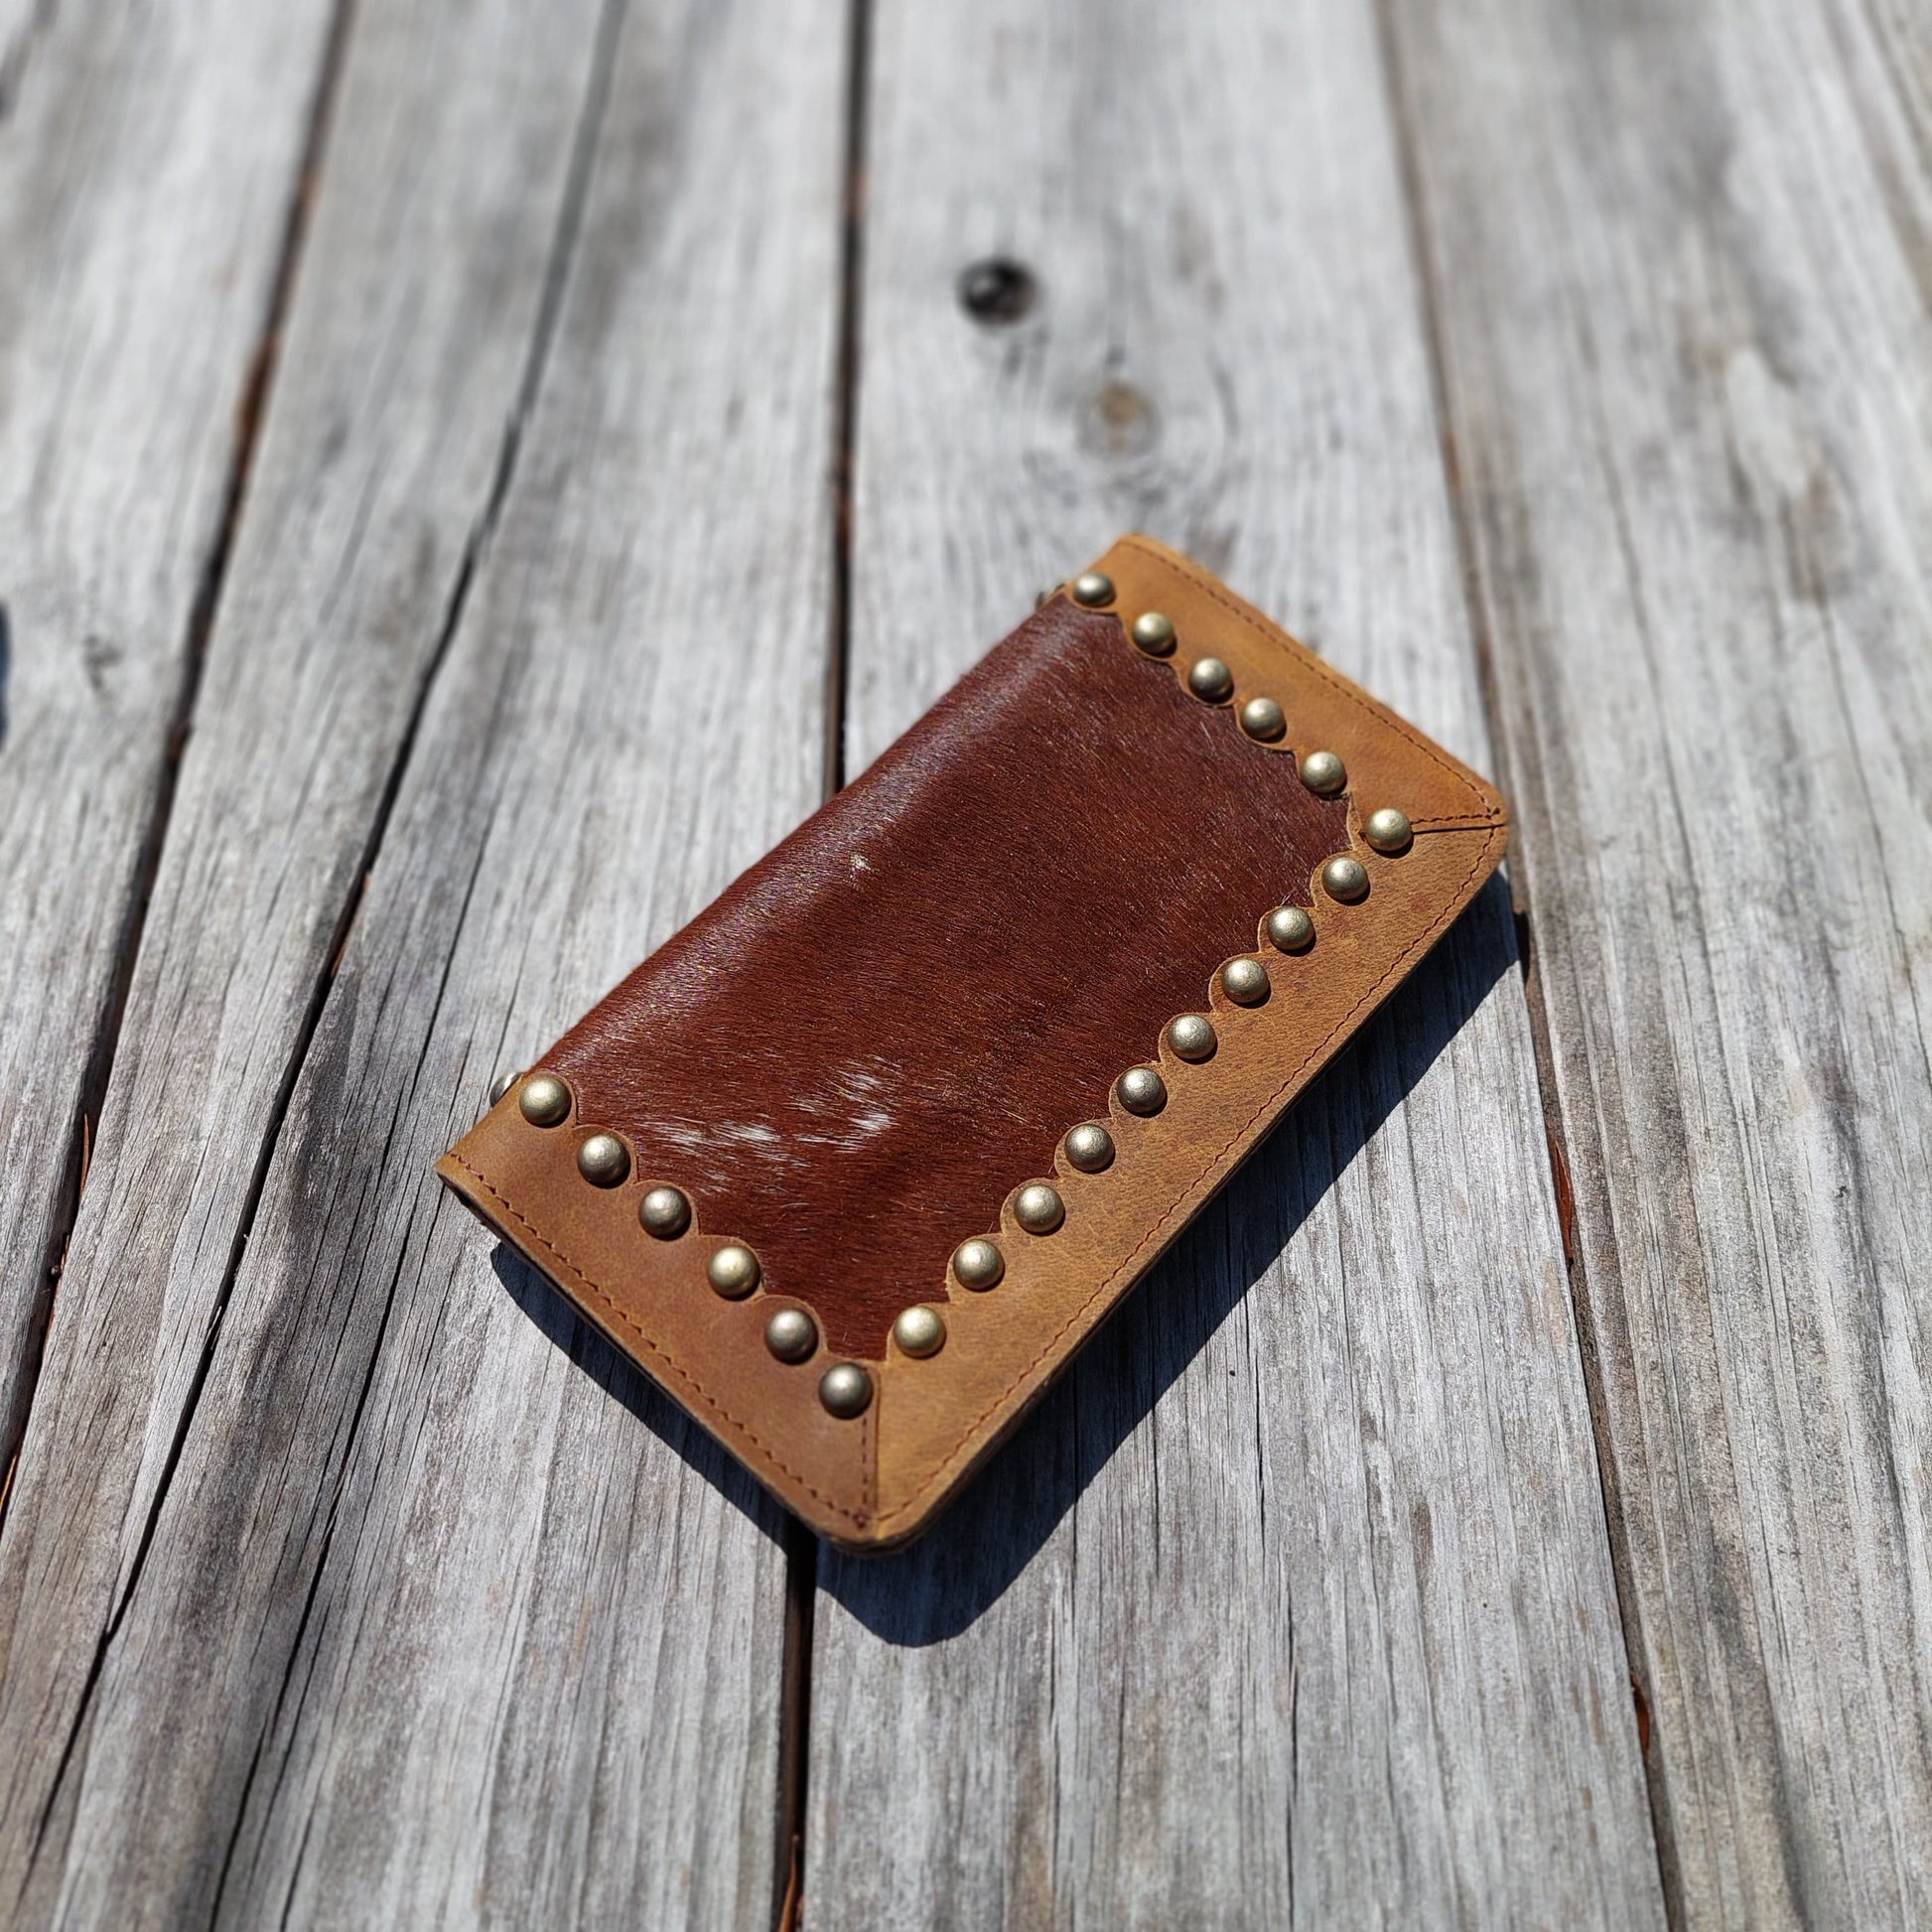 Auburn cowhide and long leather wallet two snap closure | scalloped leather trim around walled decorated with brass studs | handmade | Western wallet | unisex | Etsy 